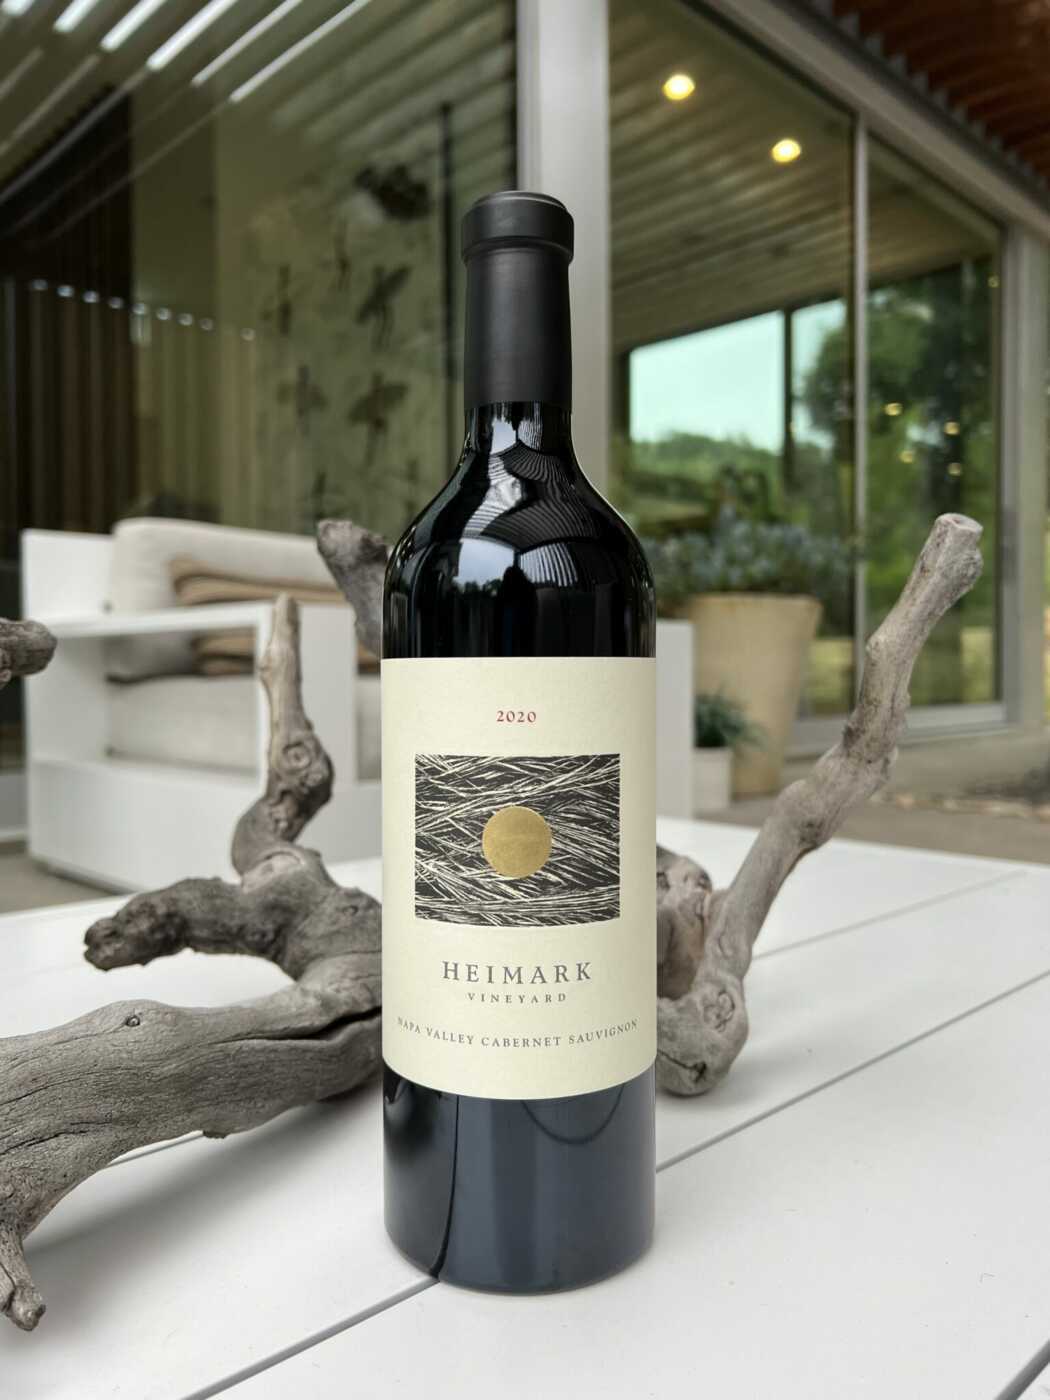 Heimark 2020 Cabernet Sauvignon on table in front of a tree branch